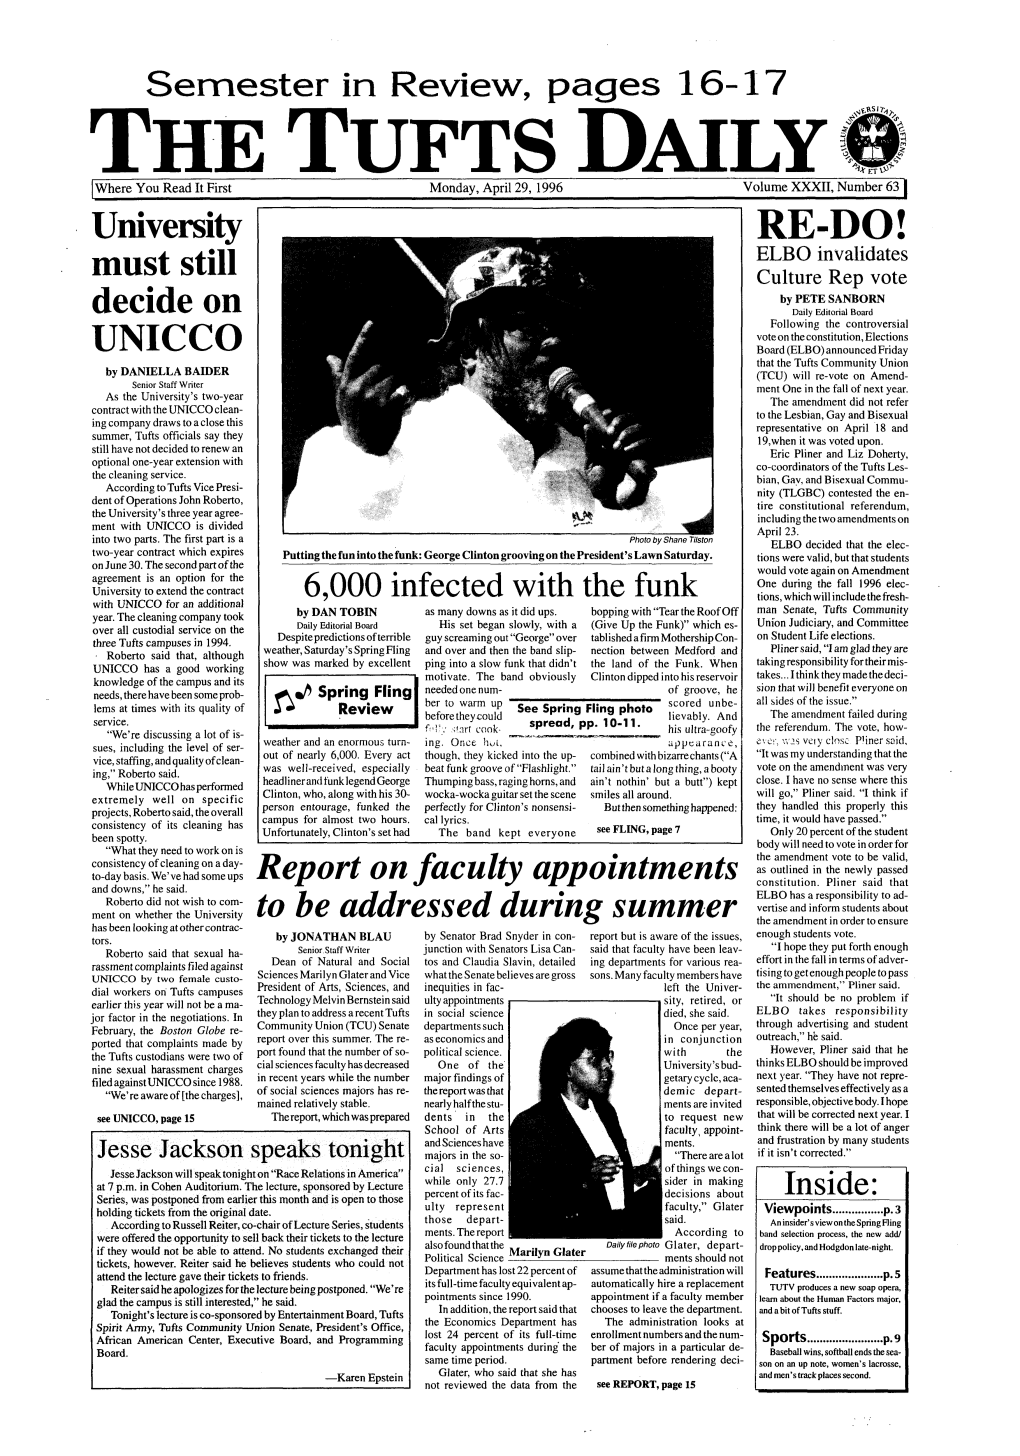 THE TUFTS DAILY Monday, April 29,1996 the TUFTSDAILJ Letters to the Editor Visit” in Last Thursday’S Viewpoints Sec- Jessica N